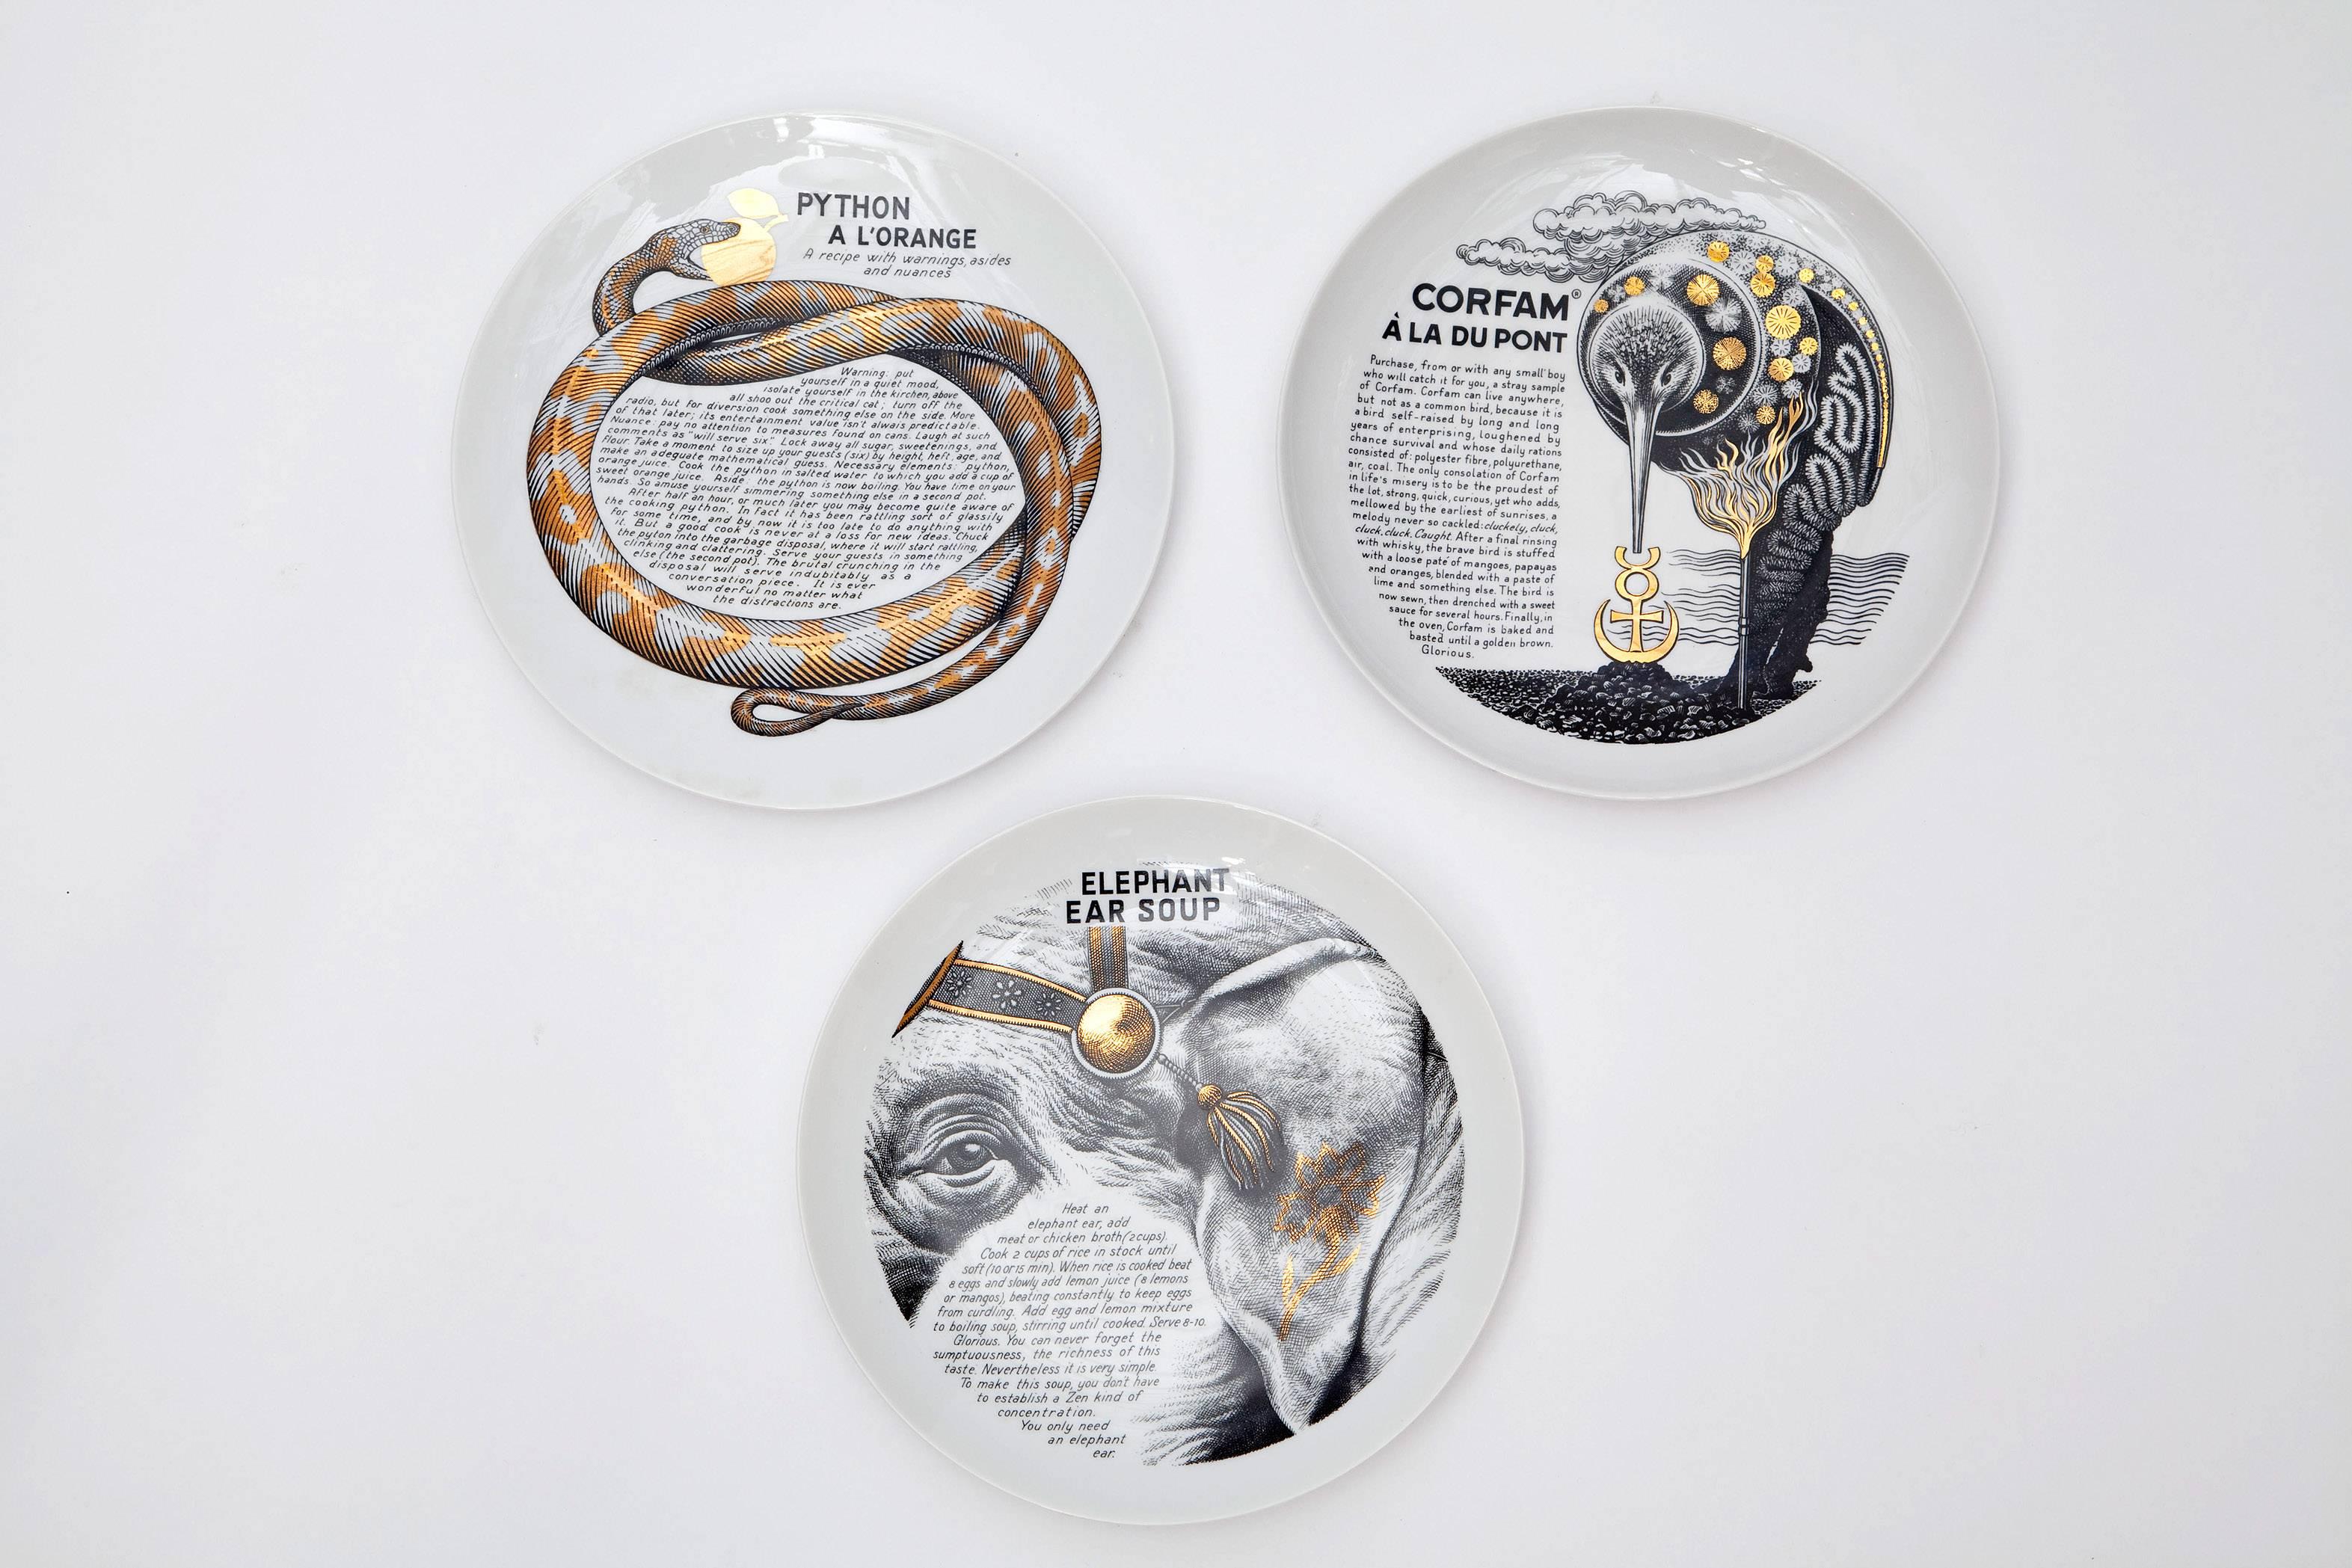 A rare collection of 12 custom commissioned plates made by Piero Fornasetti for New York small leather goods company, Fleming Joffe Ltd. in the 1960s. Given as New Years gifts to their top clients, the plates contain exotic and humorous recipes with